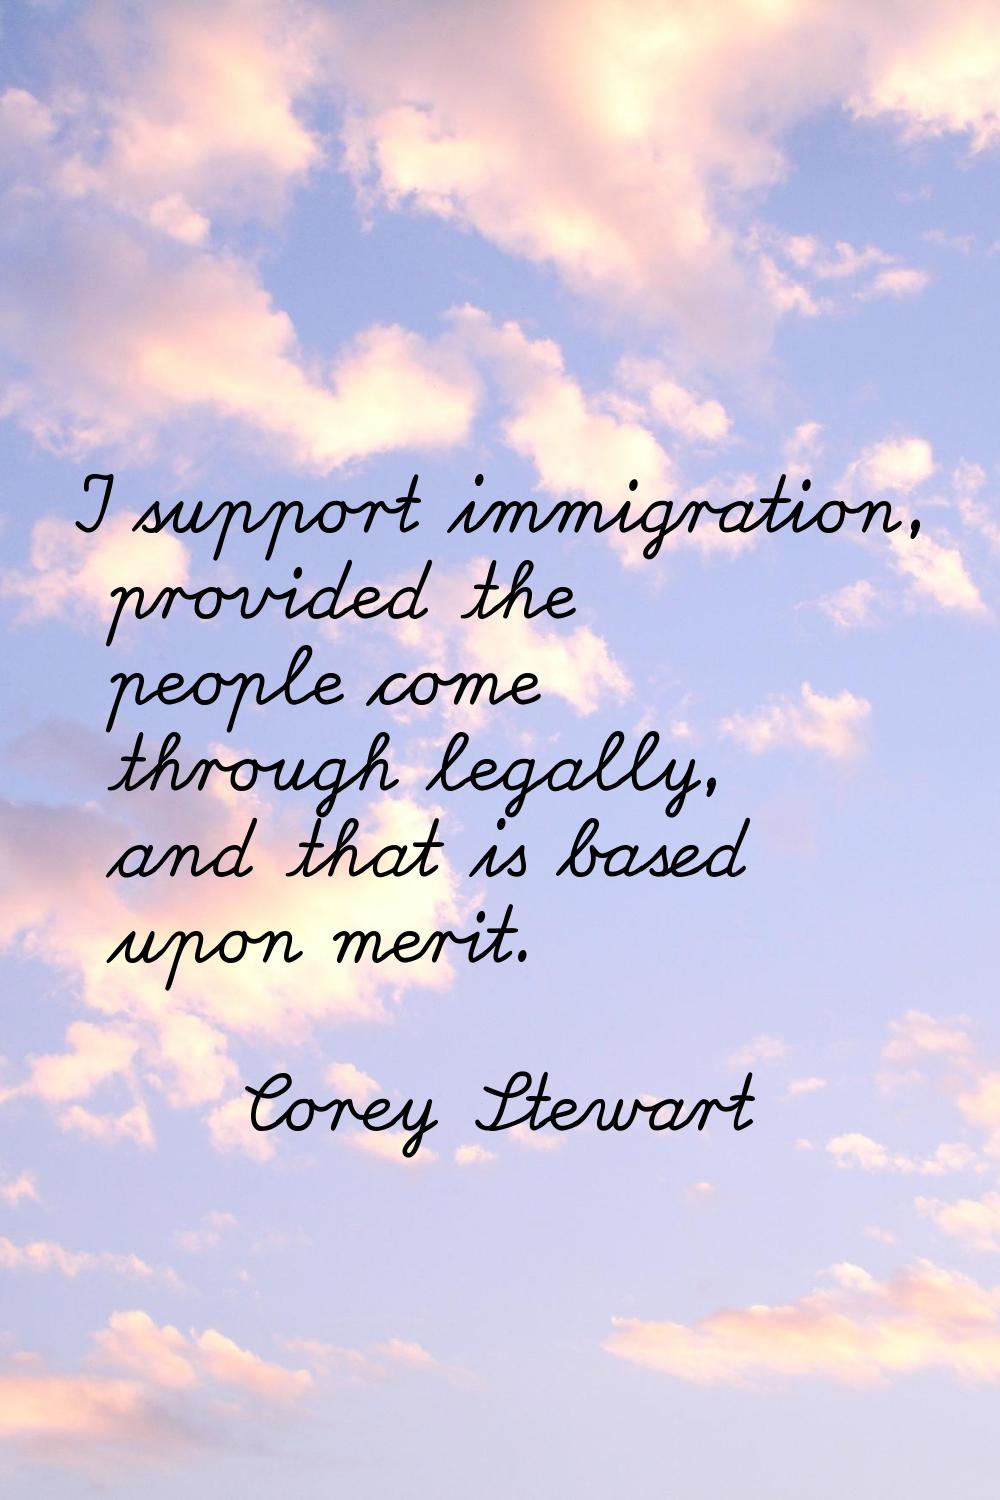 I support immigration, provided the people come through legally, and that is based upon merit.